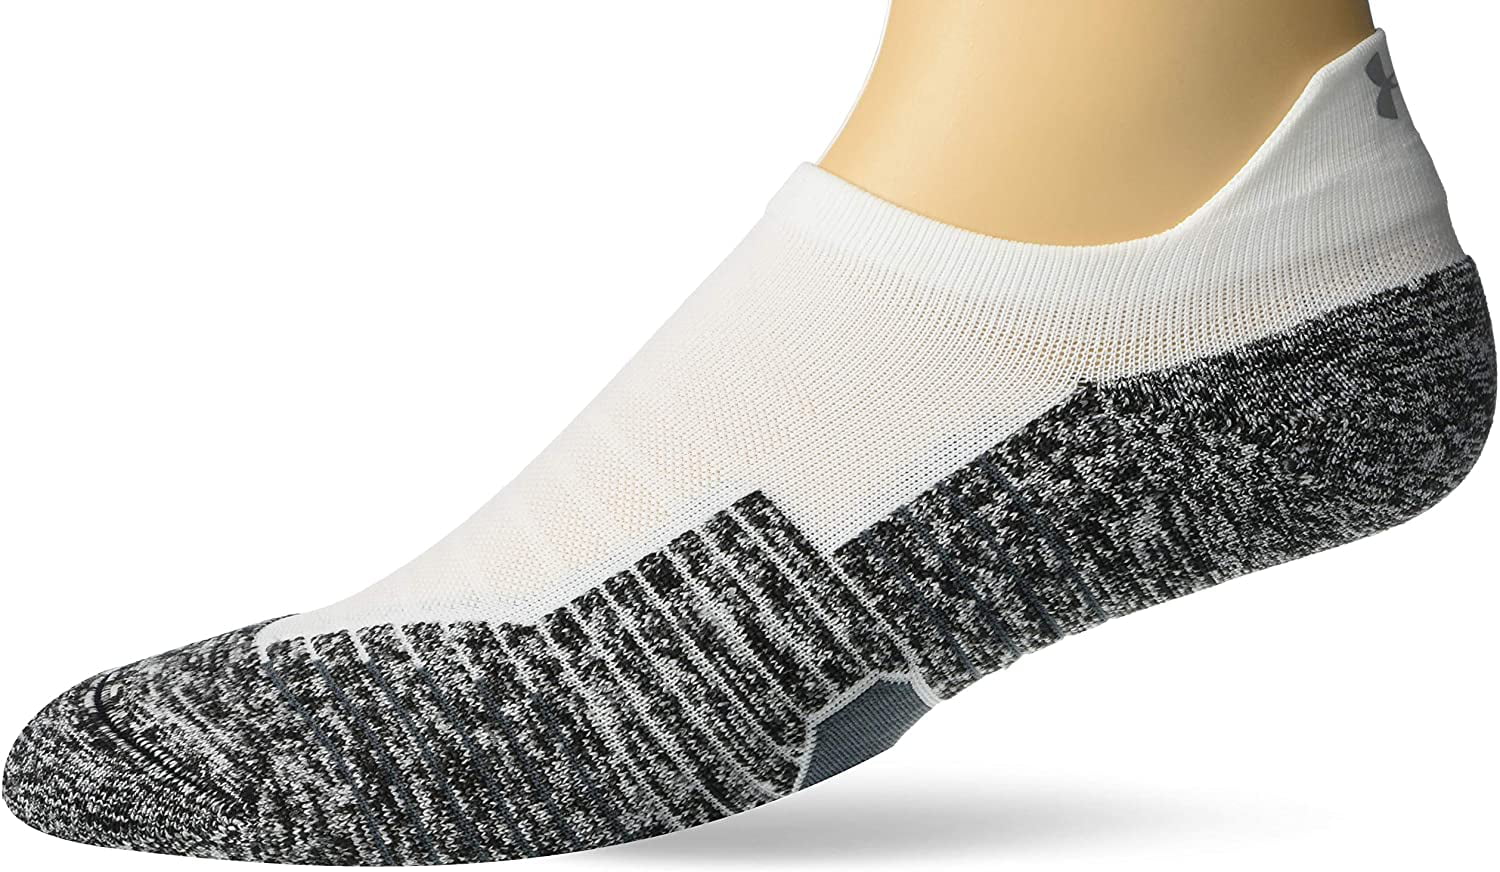 icuub Adult No Show Running Socks Cushioned 4/8 Pairs Ankle Low Cut No Blisters Tab Athletic Socks 